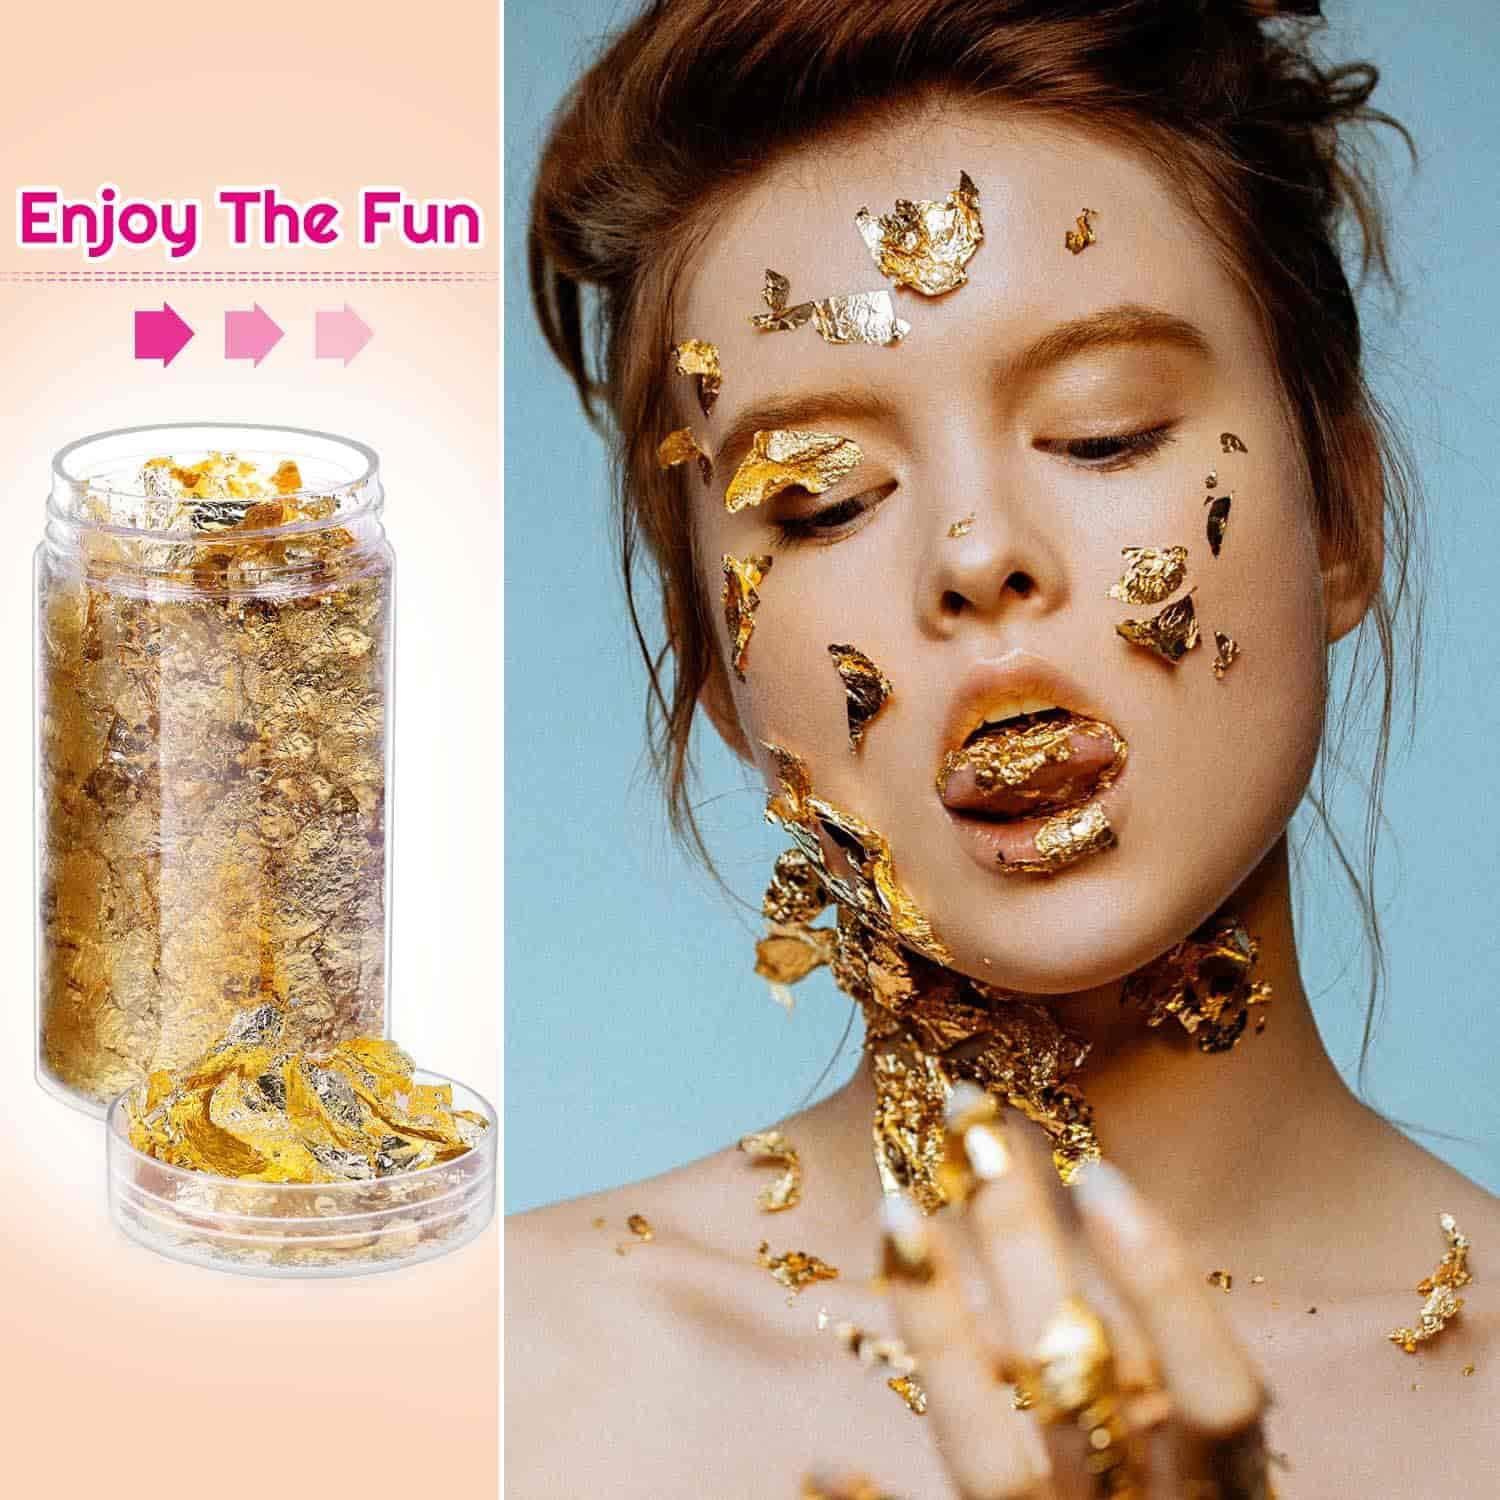 Generic Nail Gold Foil, Gold Flakes 2 Bottles 5g Nail Gold Flakes, Aluminum  + Brass Nail Art Flakes Resin Jewelry for DIY